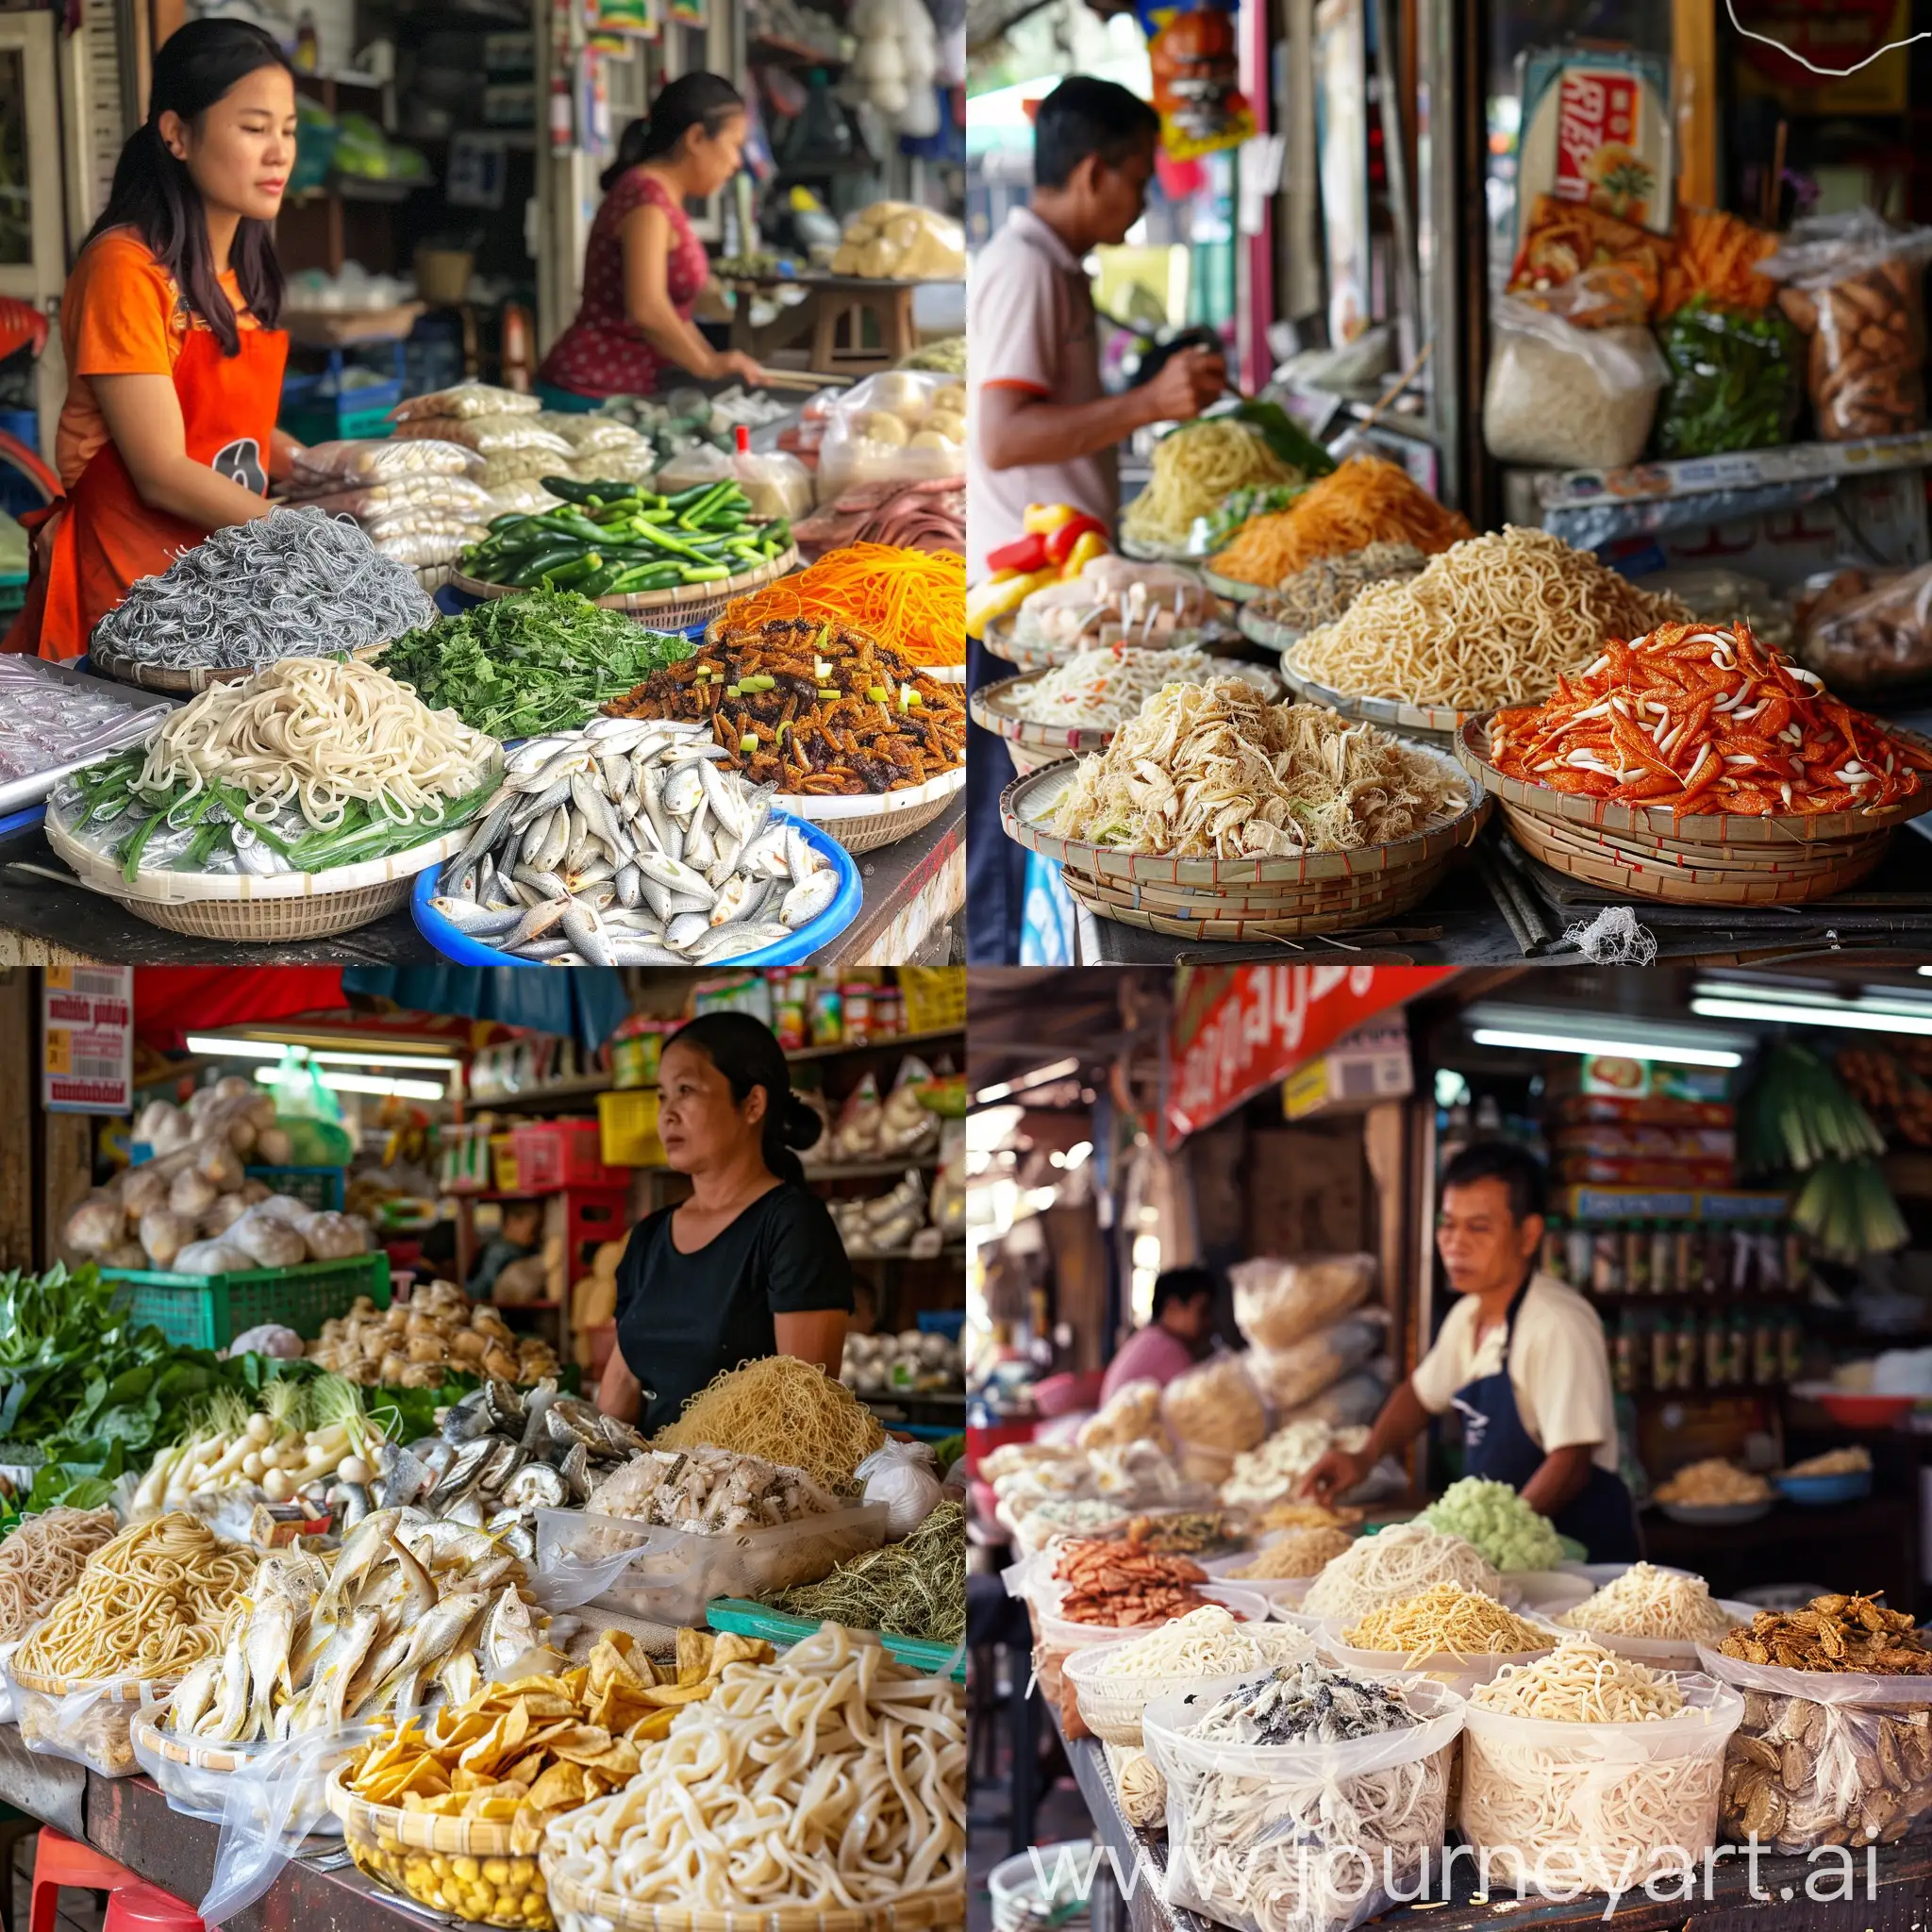 Arrange noodles, dried fish and vegetables together on a shop table with a vendor.